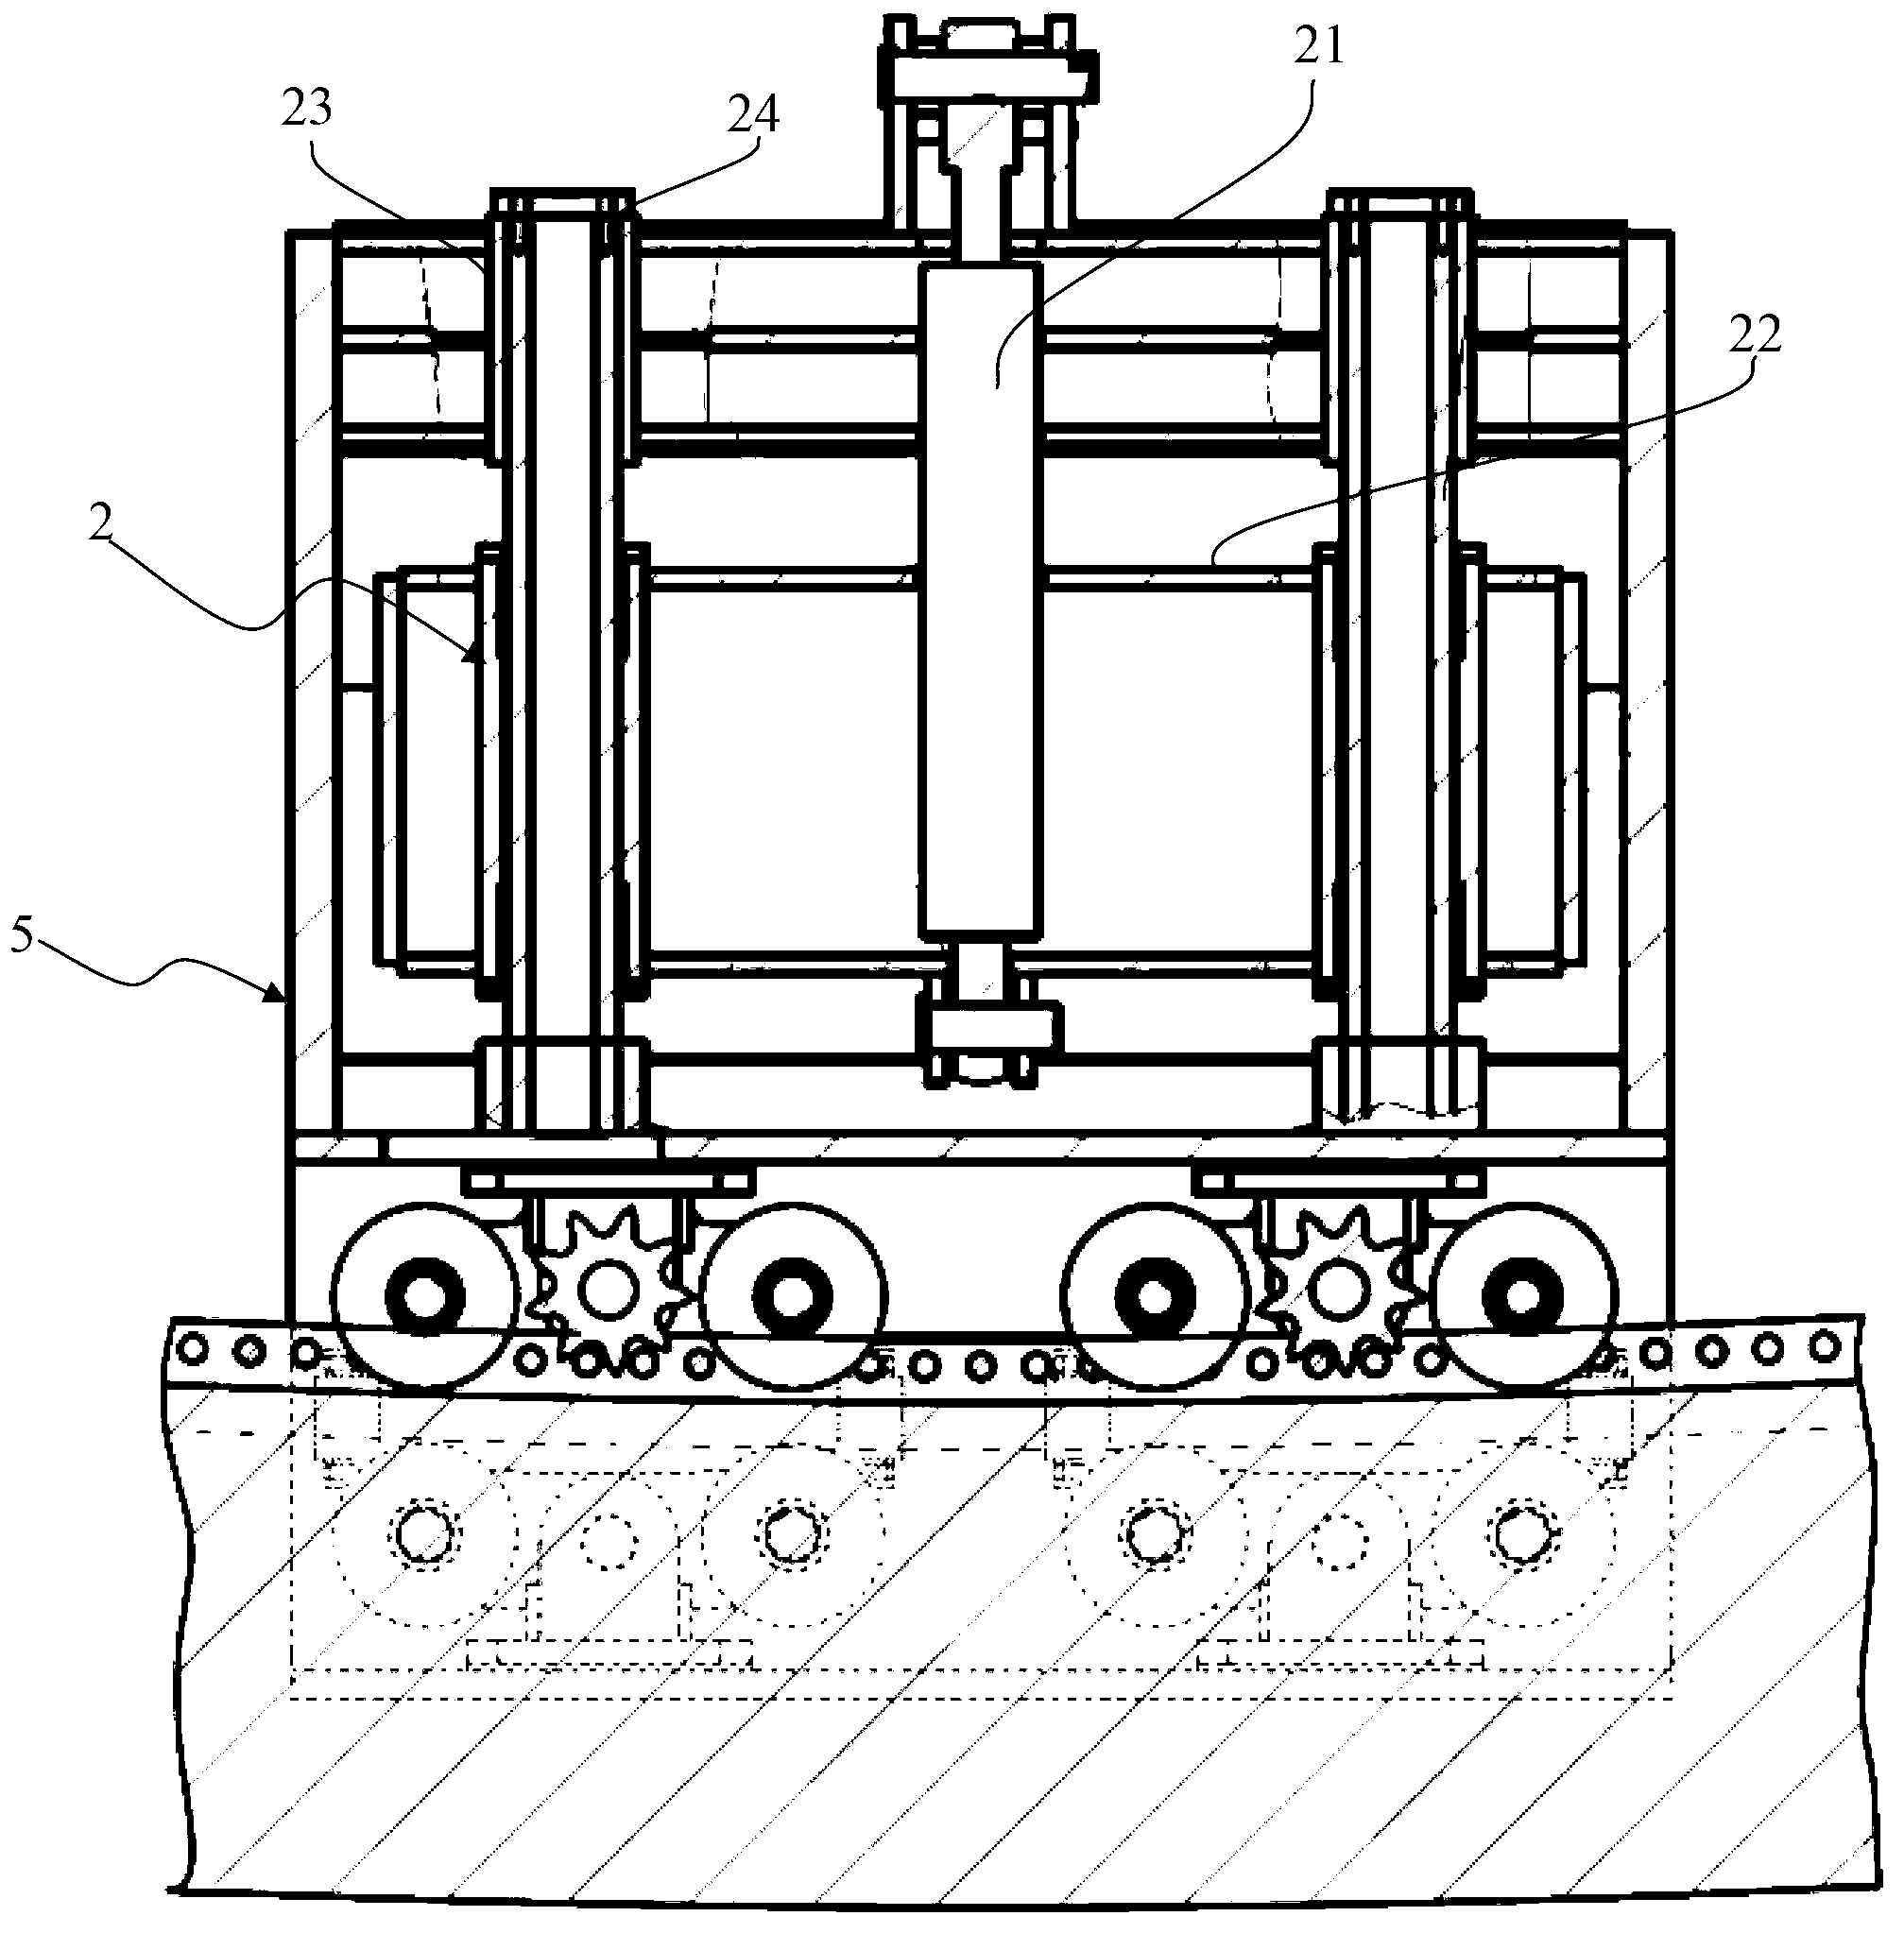 Special-shaped cross-section shield segment erector